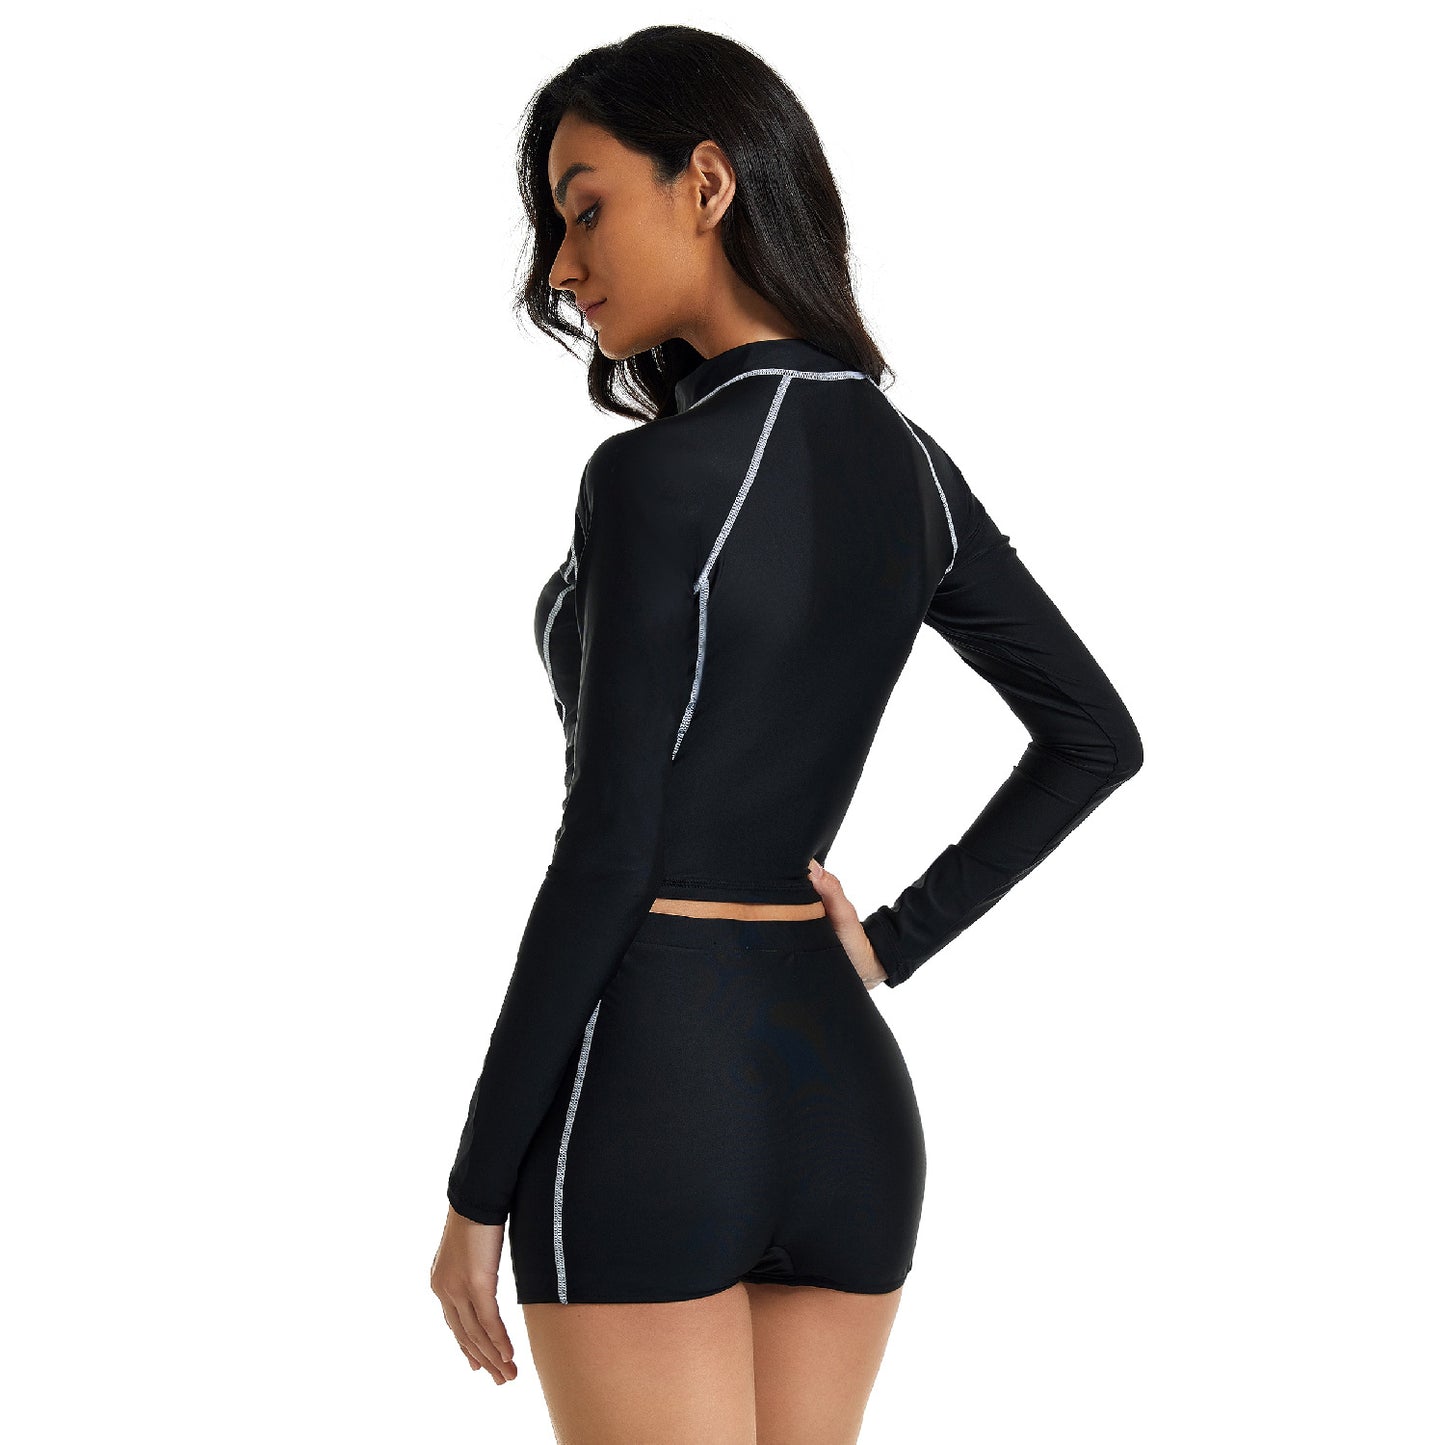 Black Long Sleeves Surfing Wetsuits for Women